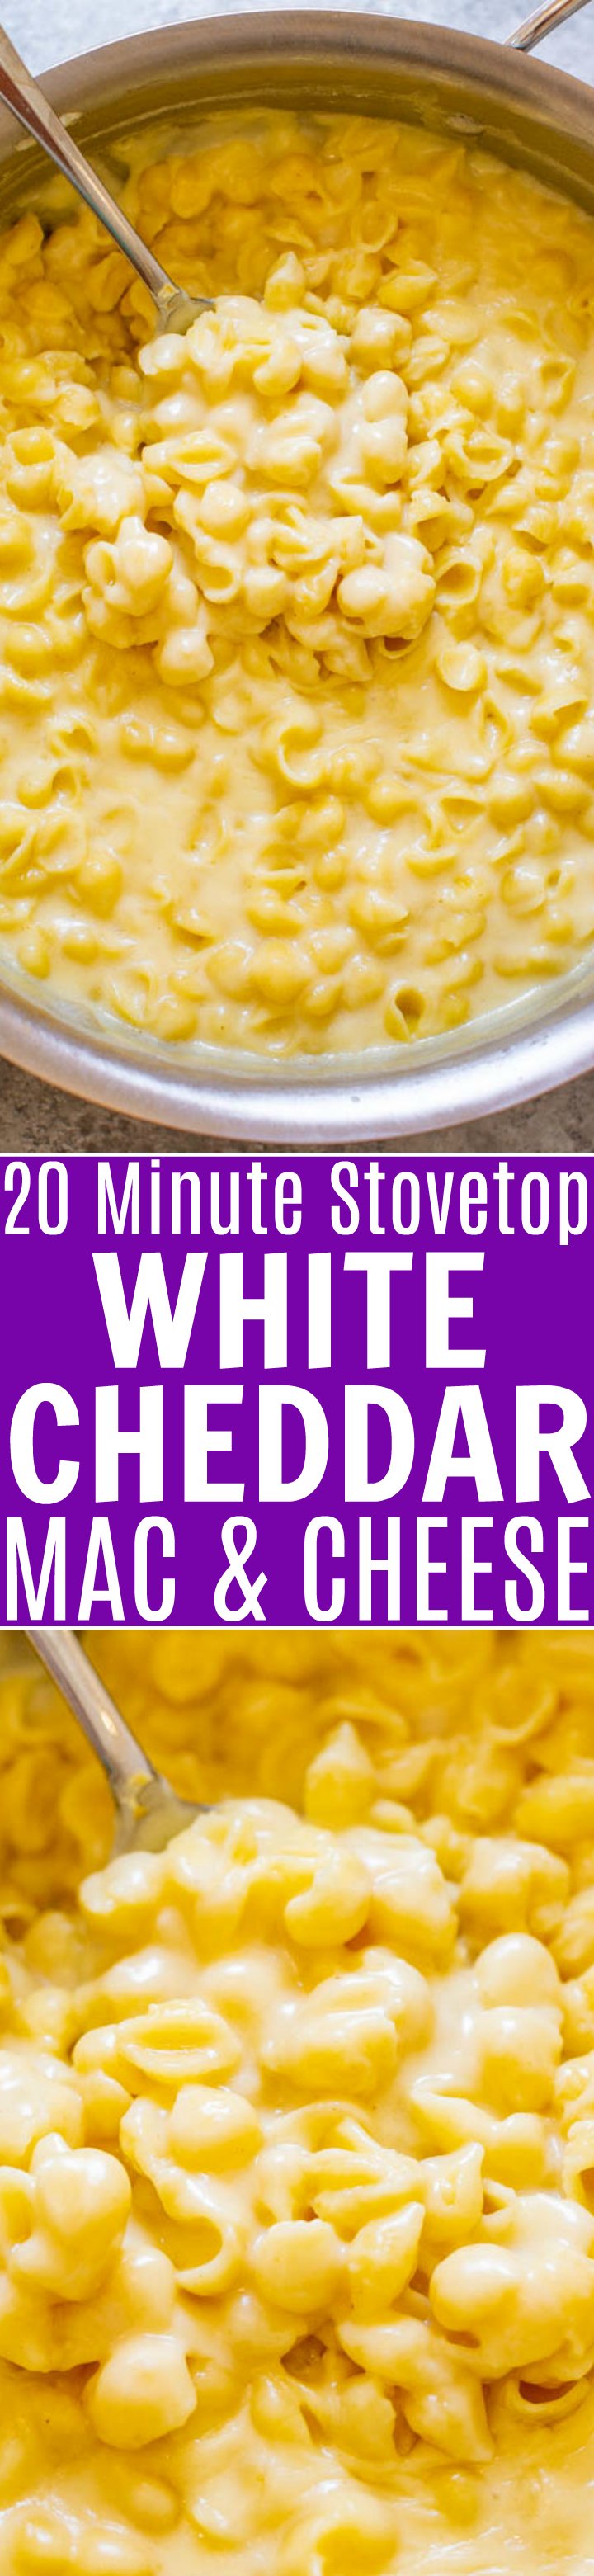 20-Minute Stovetop White Cheddar Mac and Cheese - Almost as FAST and EASY as using a box but tastes a million times BETTER!! So creamy, ridiculously cheesy, and the extra sharp white cheddar cheese gives this mac and cheese so much FLAVOR!!